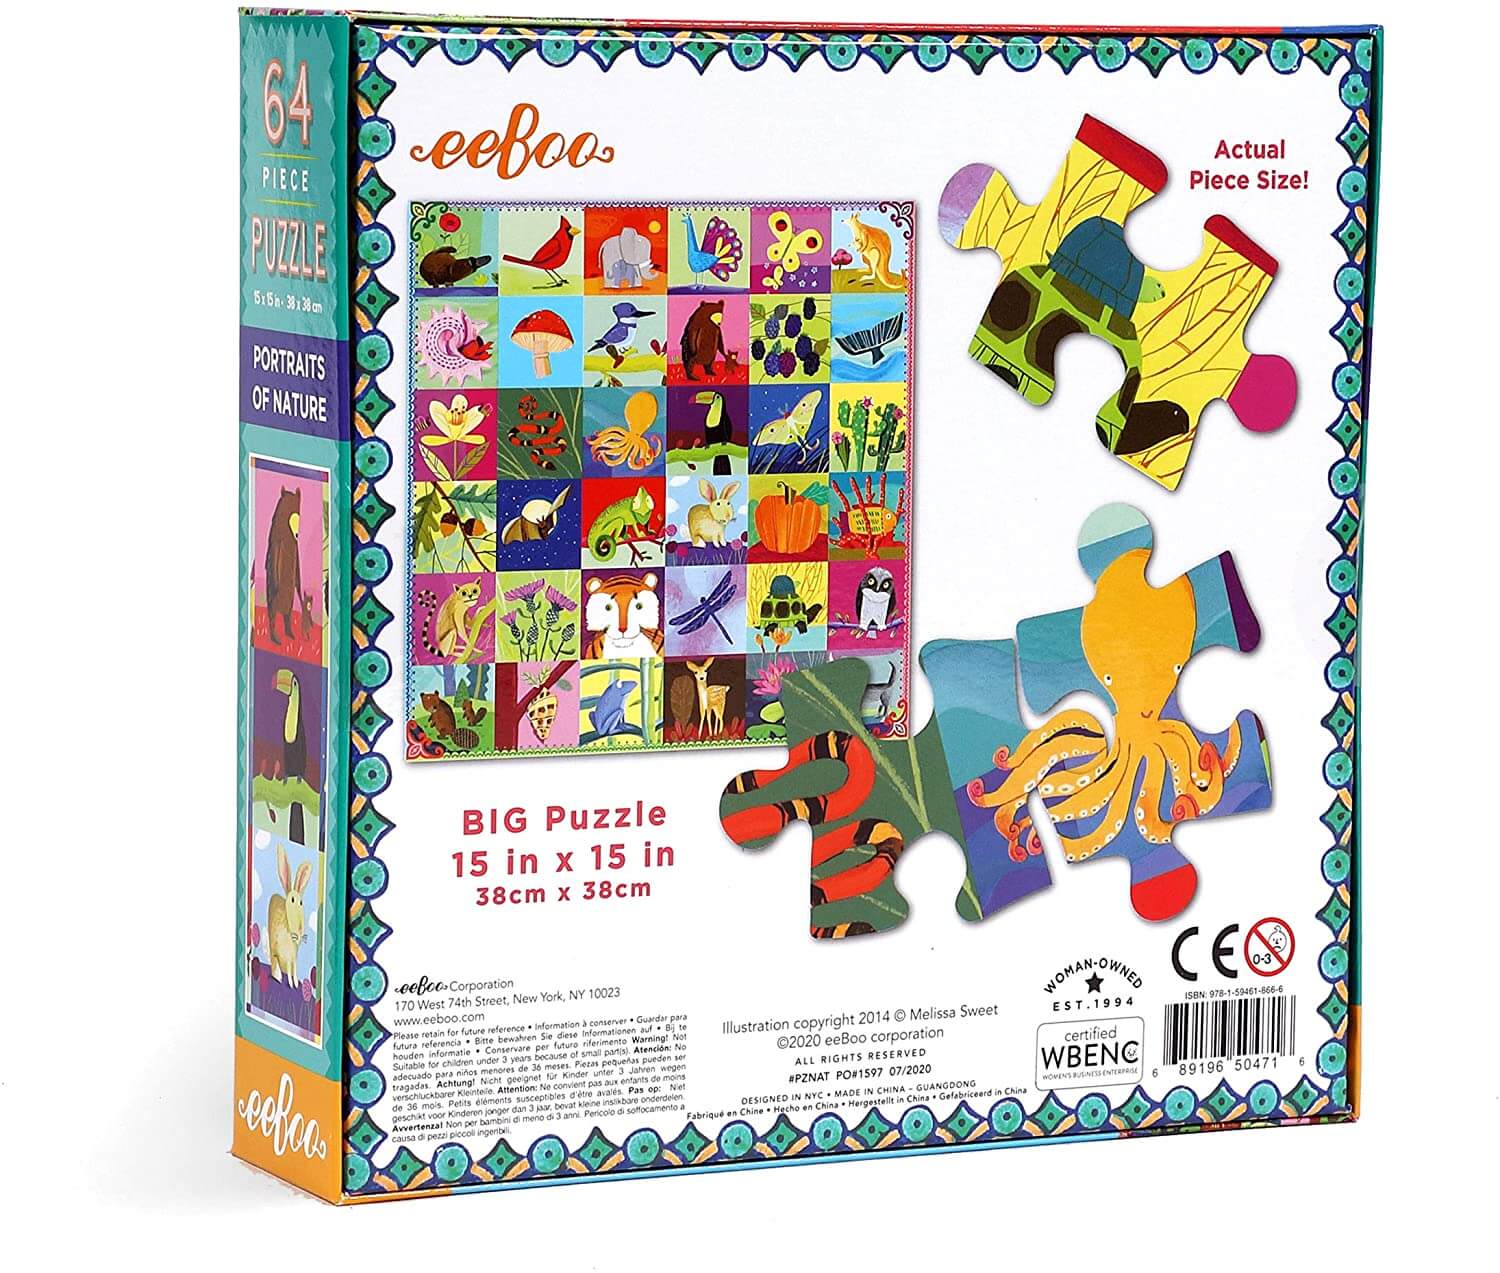 eeBoo - Portraits of Nature 64 Piece Jigsaw Puzzle for Kids photo of back of box